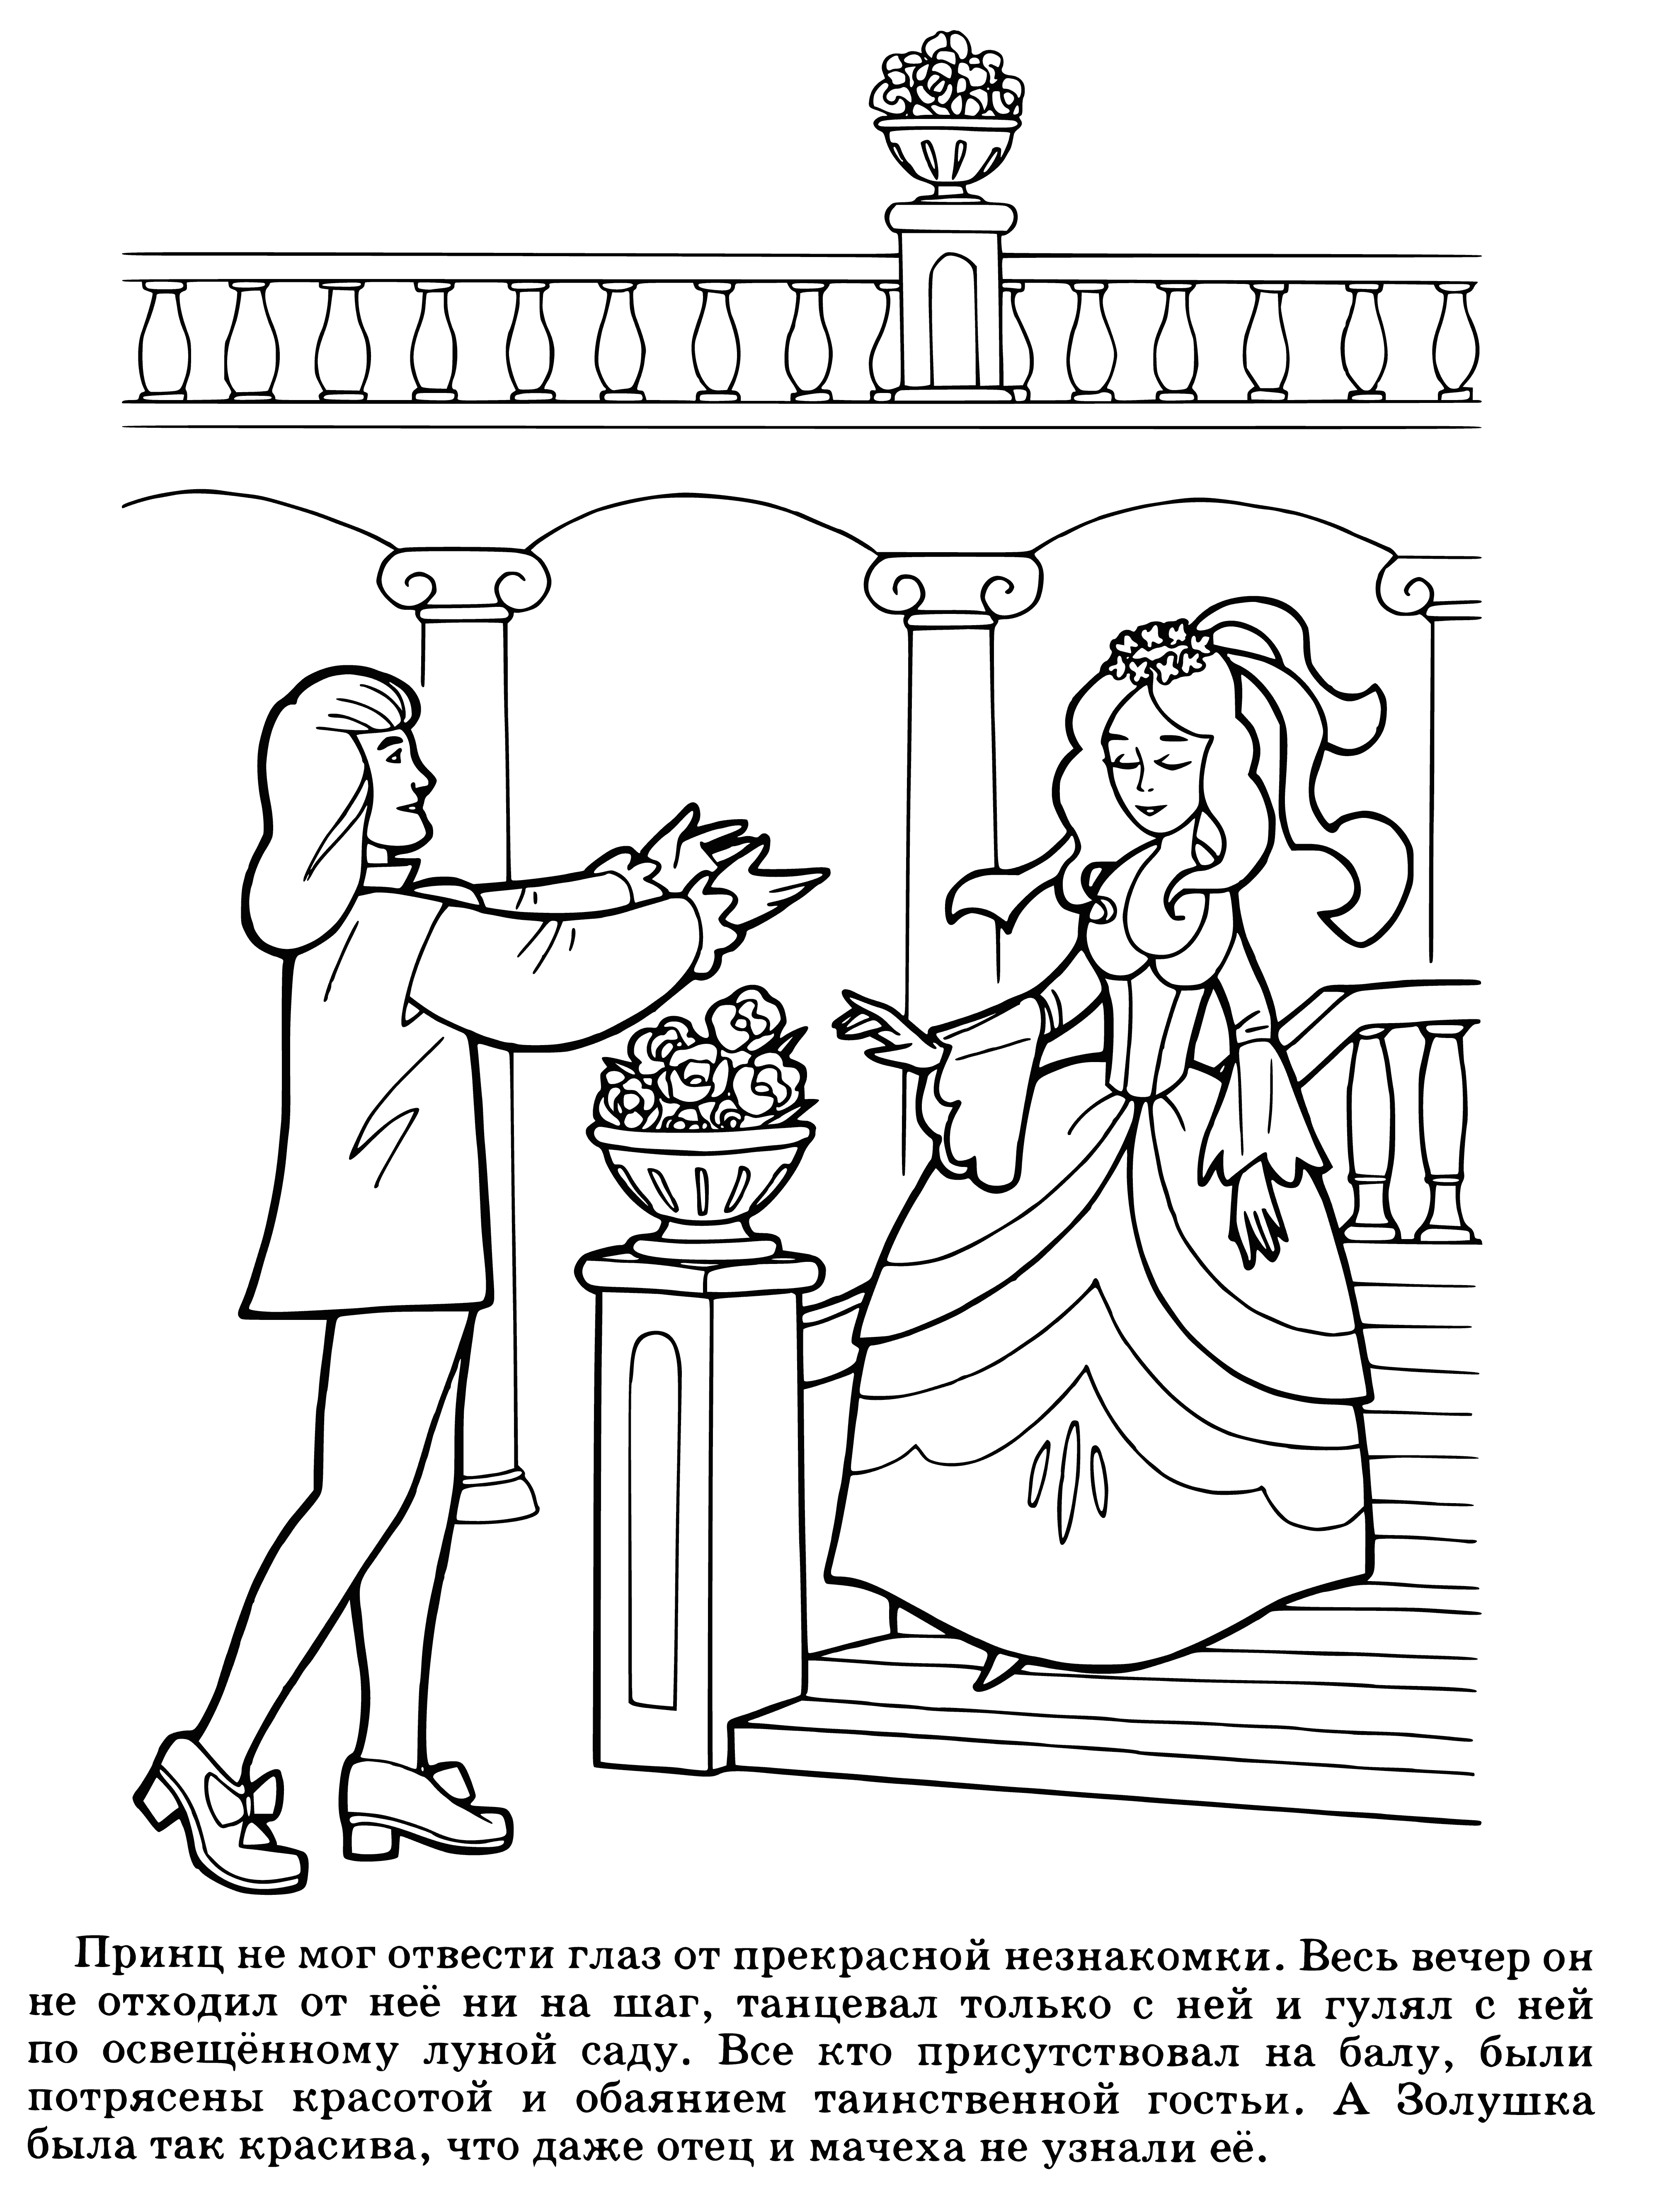 The prince is delighted coloring page